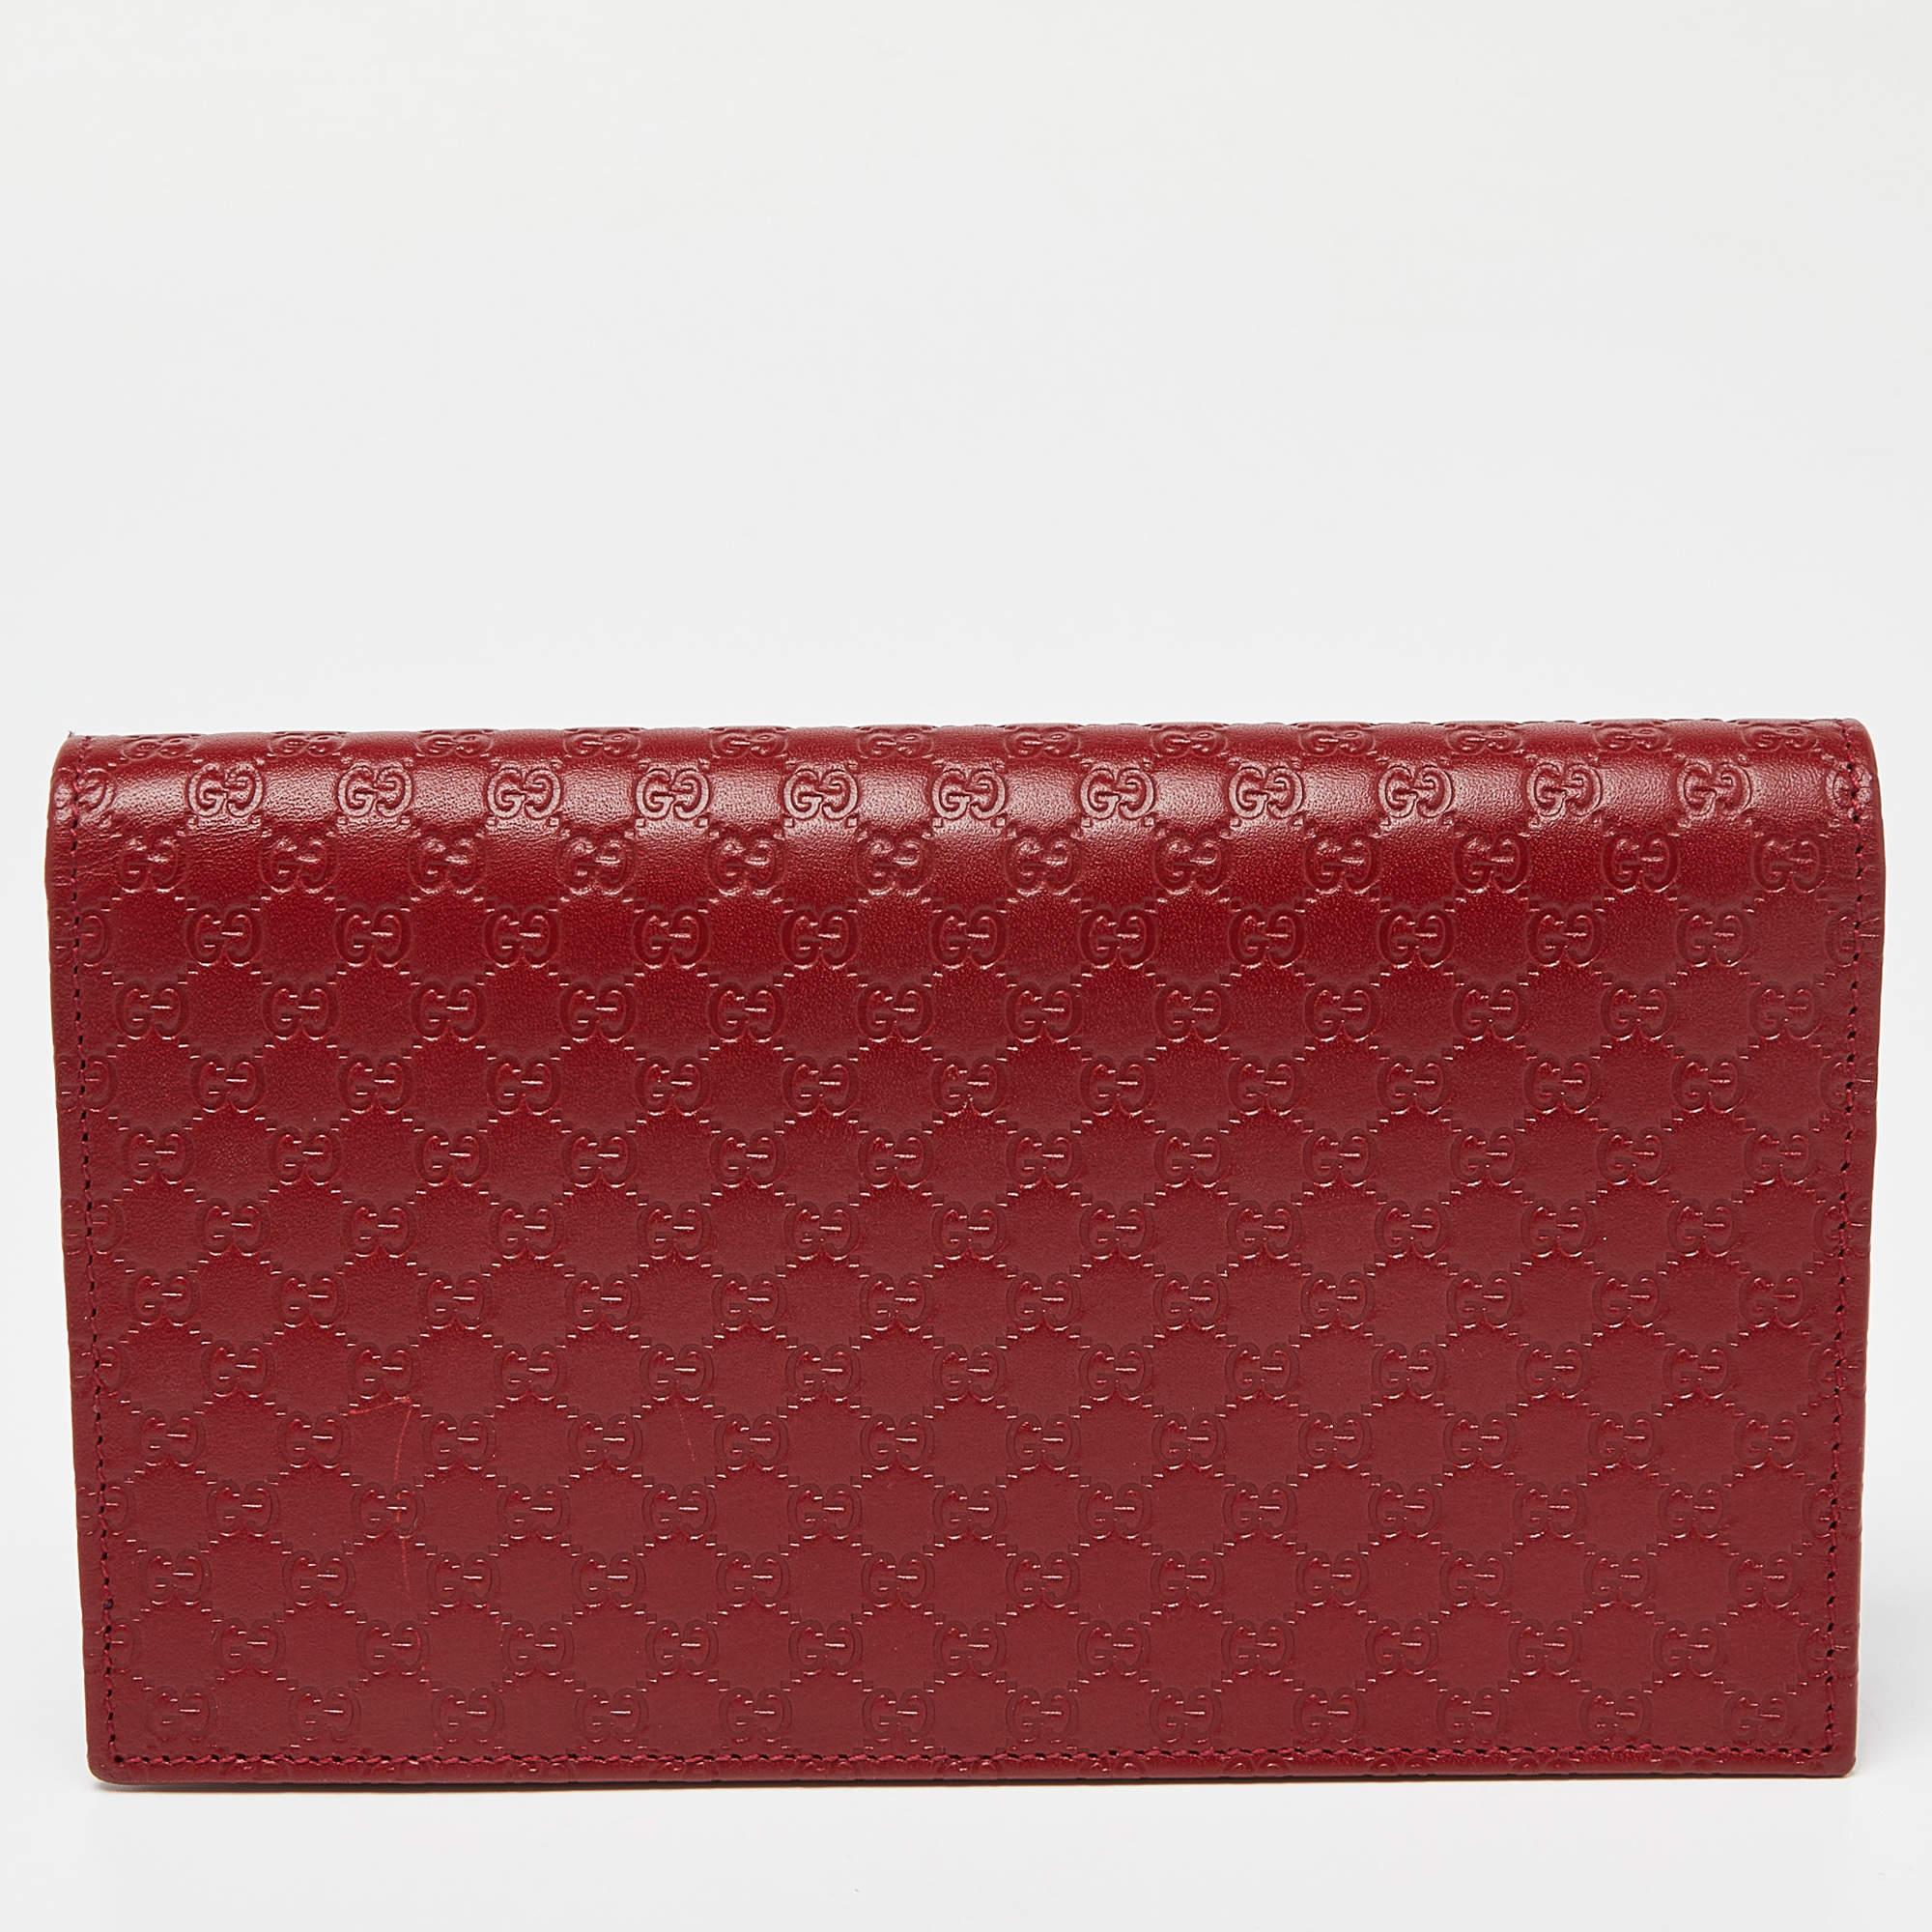 Gucci Red Microguccissima Leather Flap Crossbody Bag 5